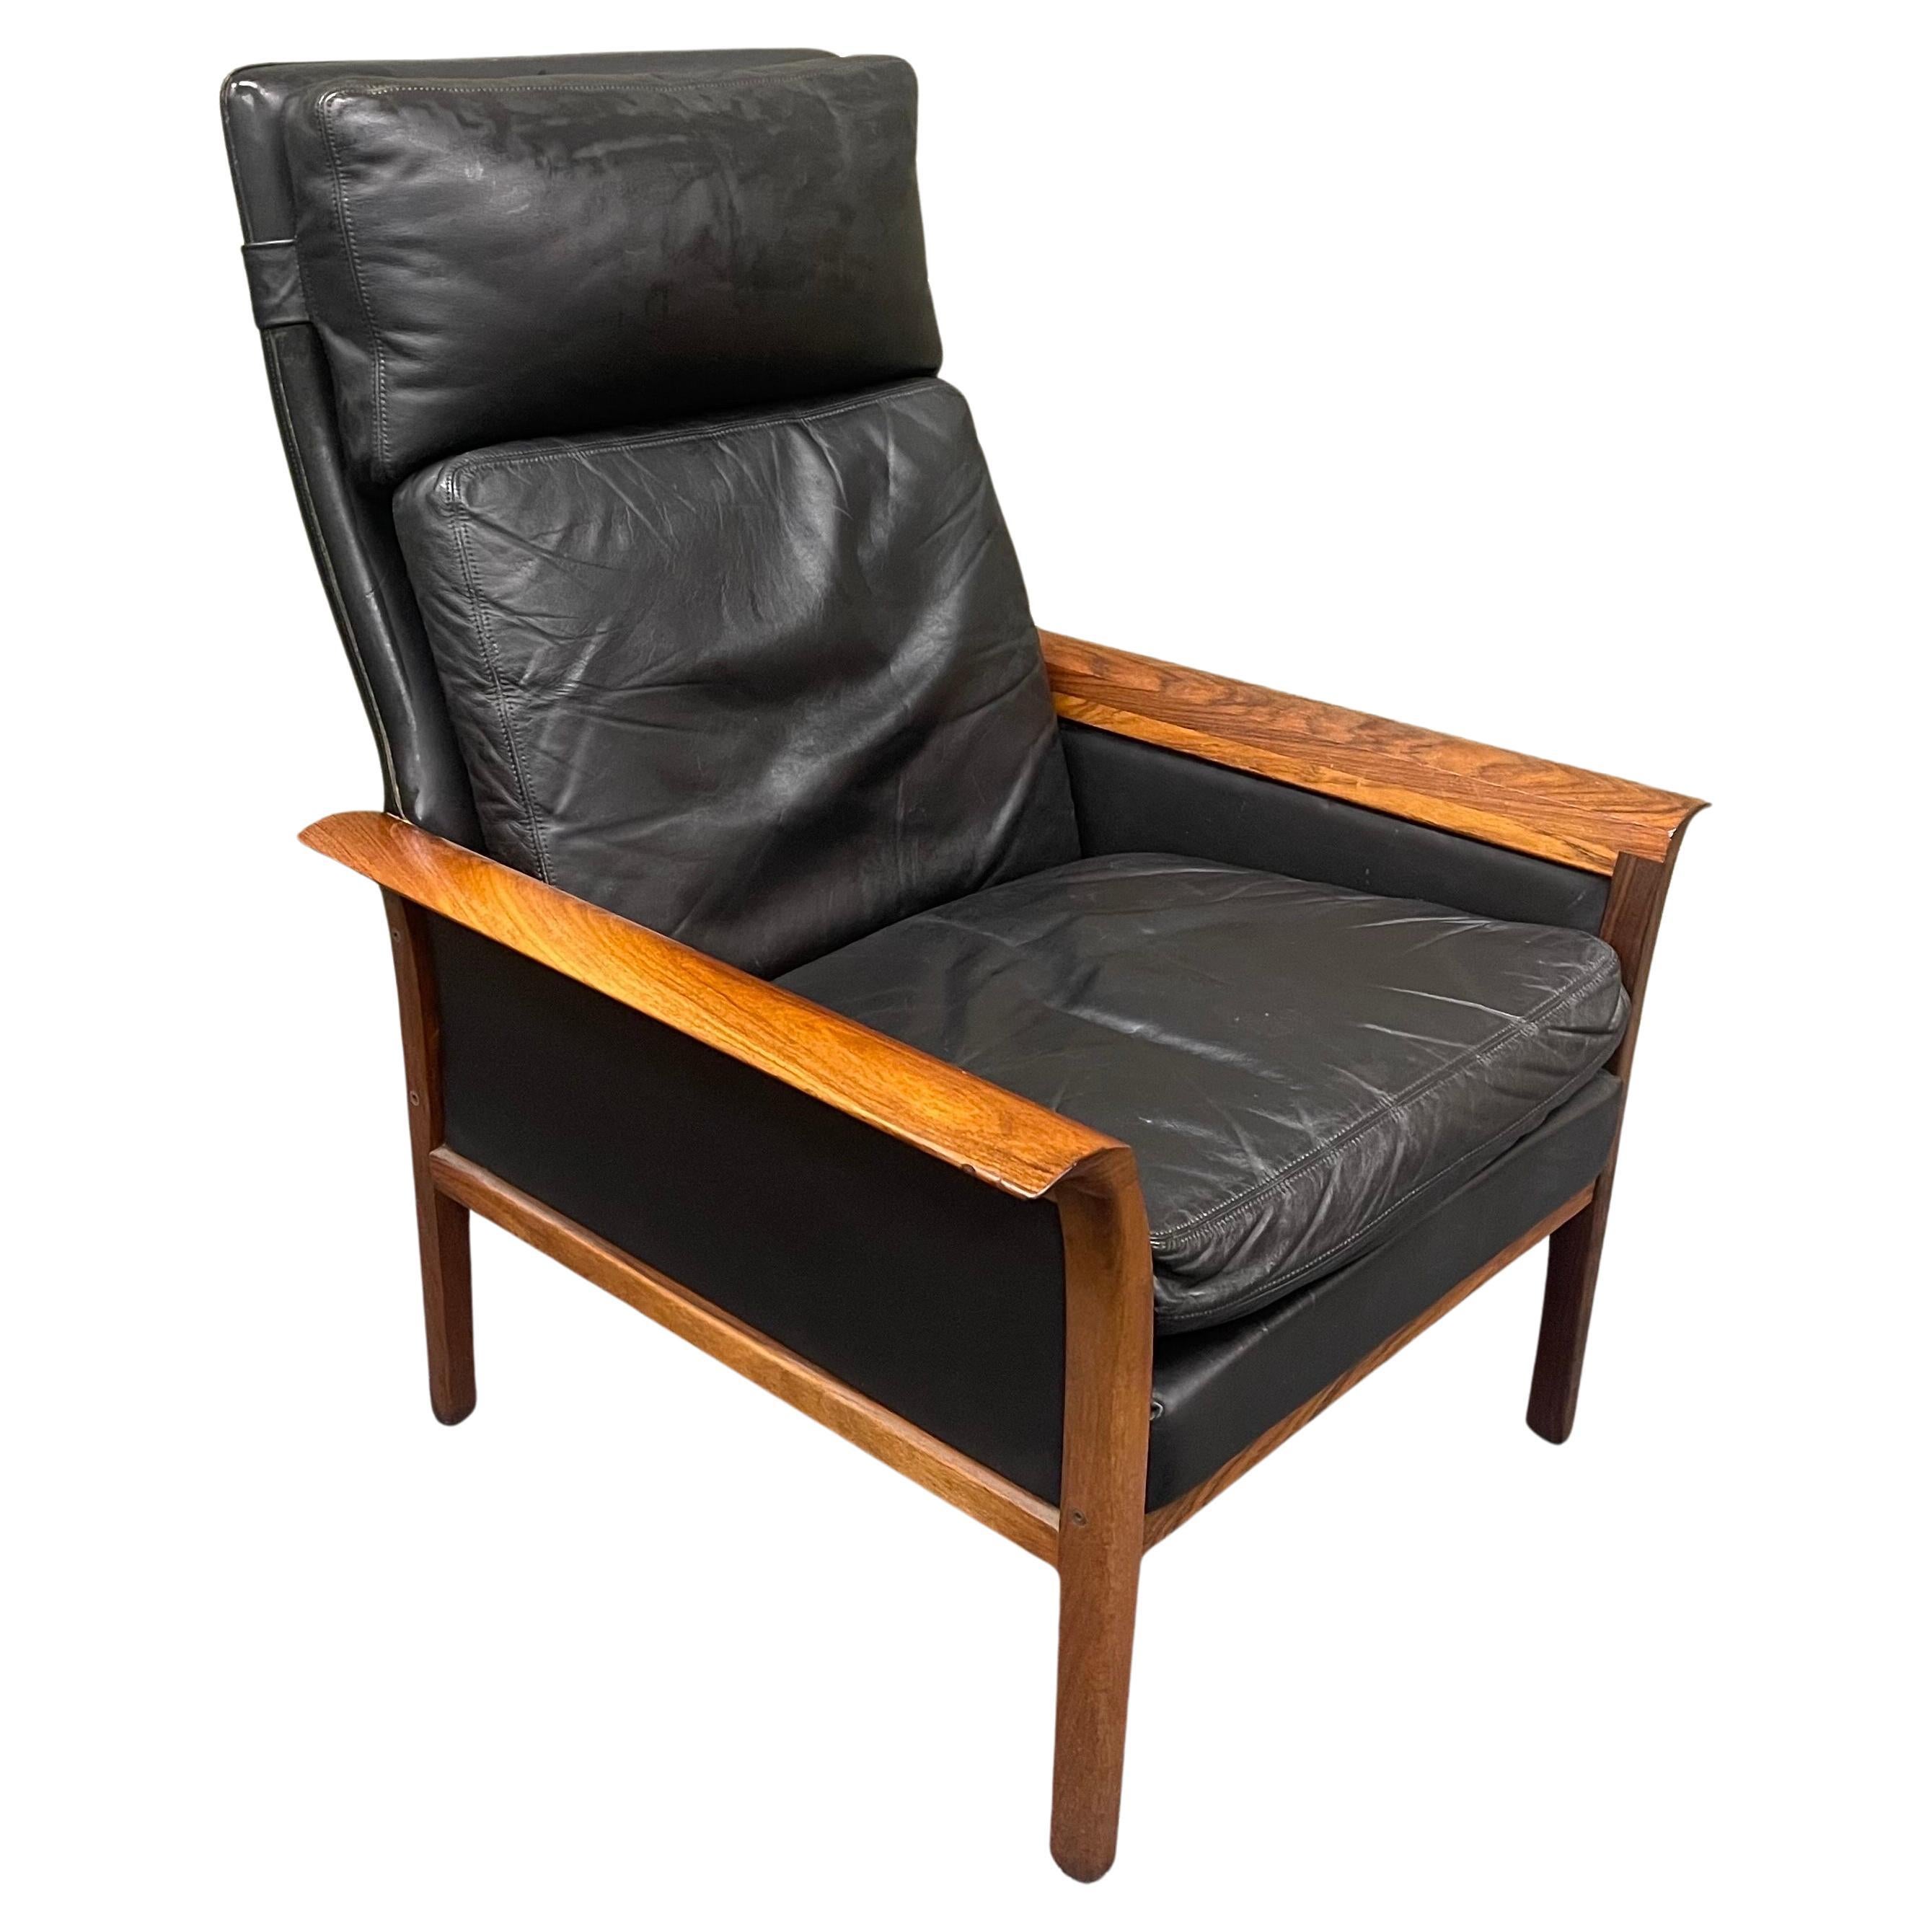 A very nice MCM scandinavian modern Model 924 Lounge Chair by Knut Saeter for Vatne Mobler, circa 1970s. This stunning Norweigian chair features rich vintage leather and sculpted arms with a well constructed rosewood frame. The chair is very well